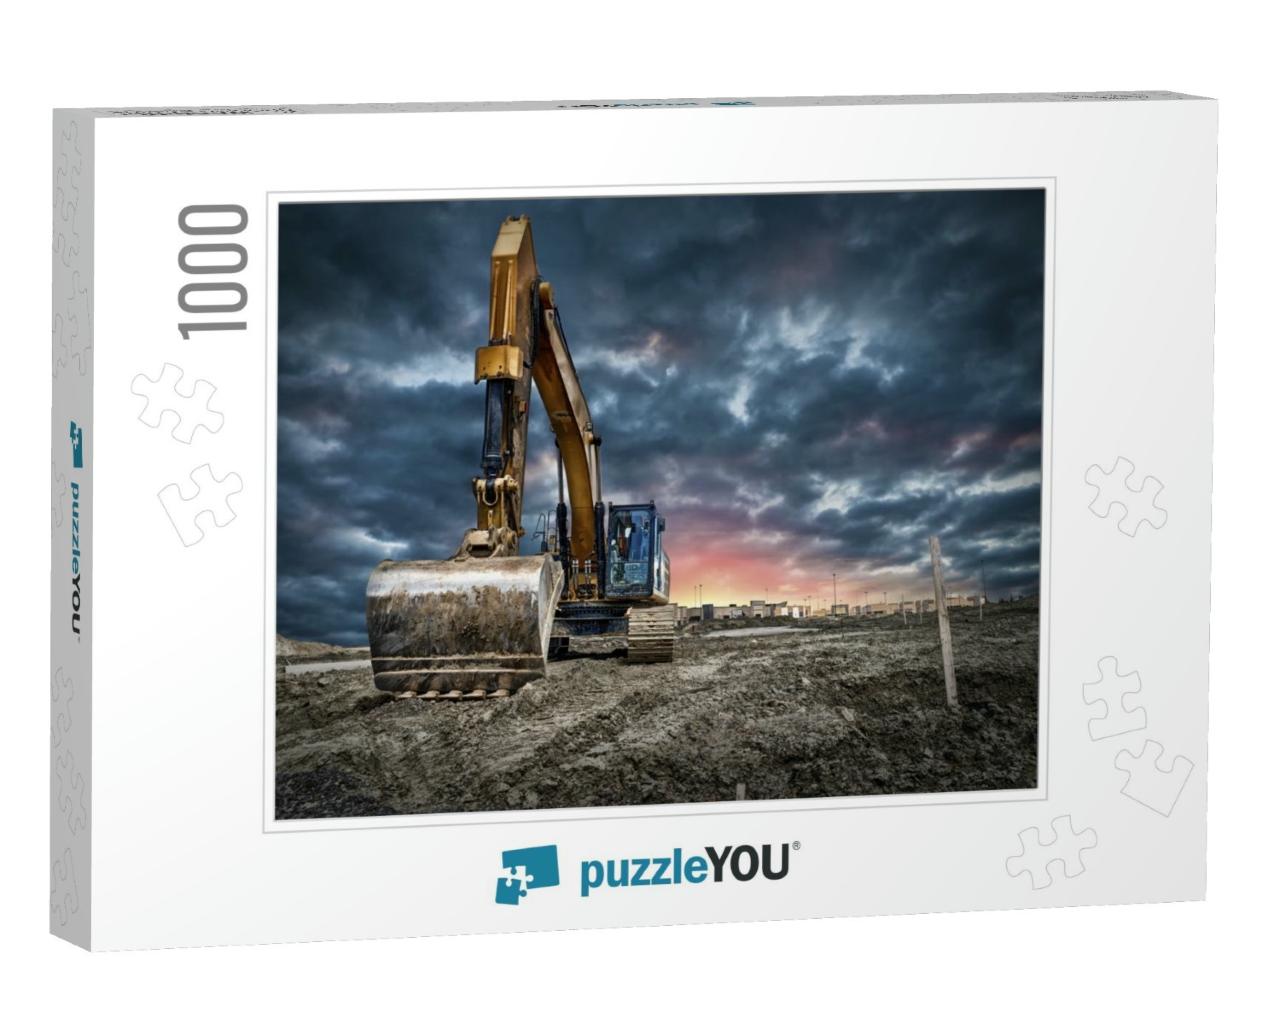 Excavator Machinery At Construction Site, Sunset in Backg... Jigsaw Puzzle with 1000 pieces